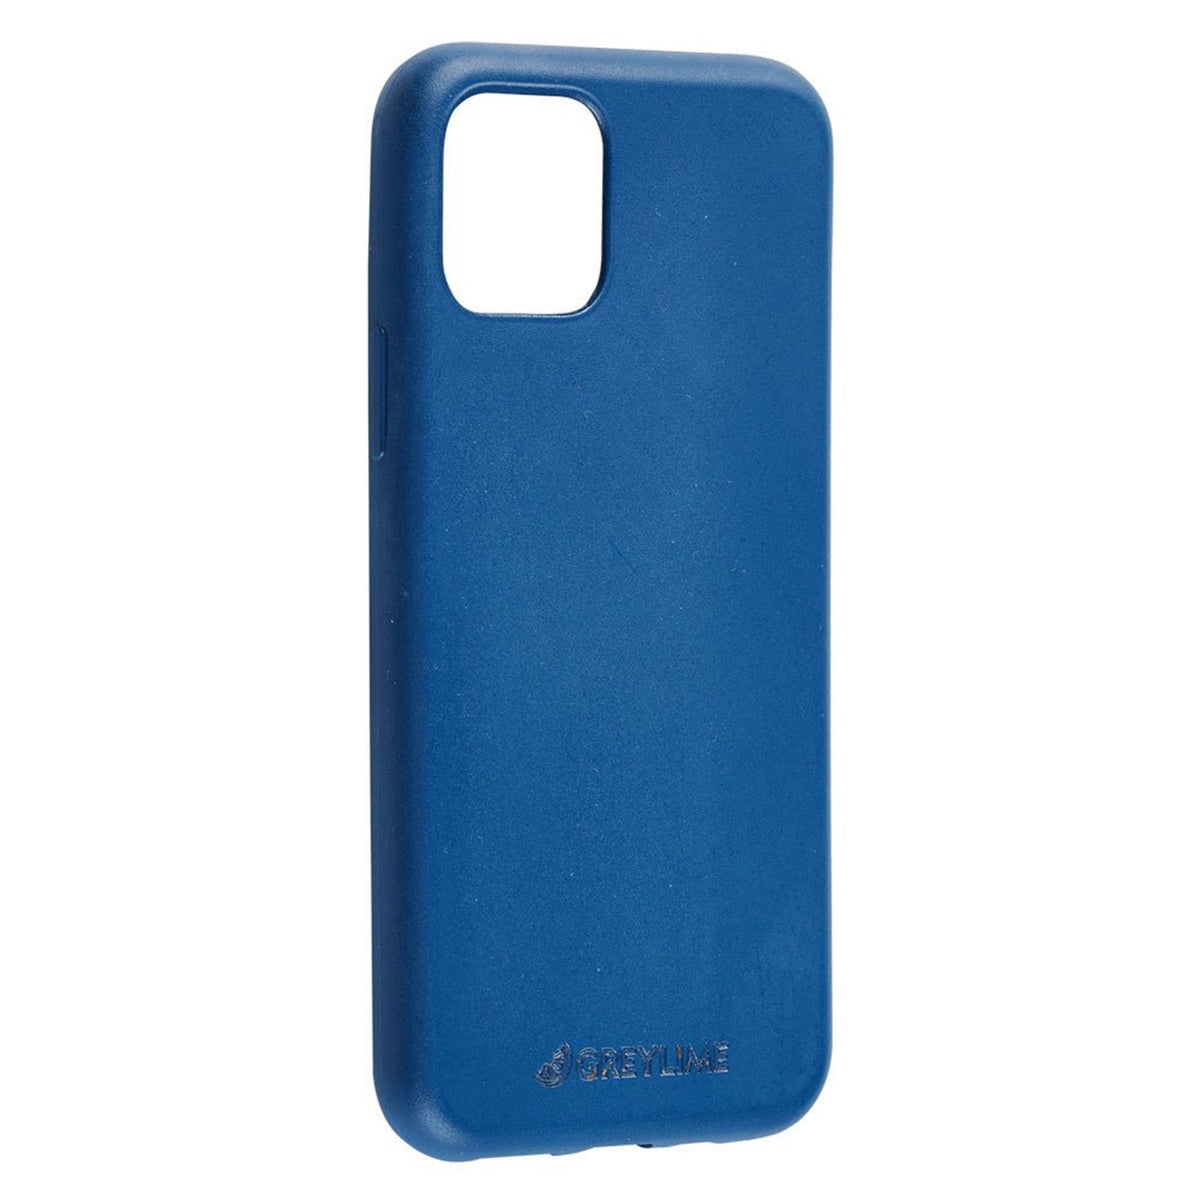 GreyLime-iPhone-11-Pro-biodegradable-cover-Navy-Blue-COIP11P03-V1.jpg